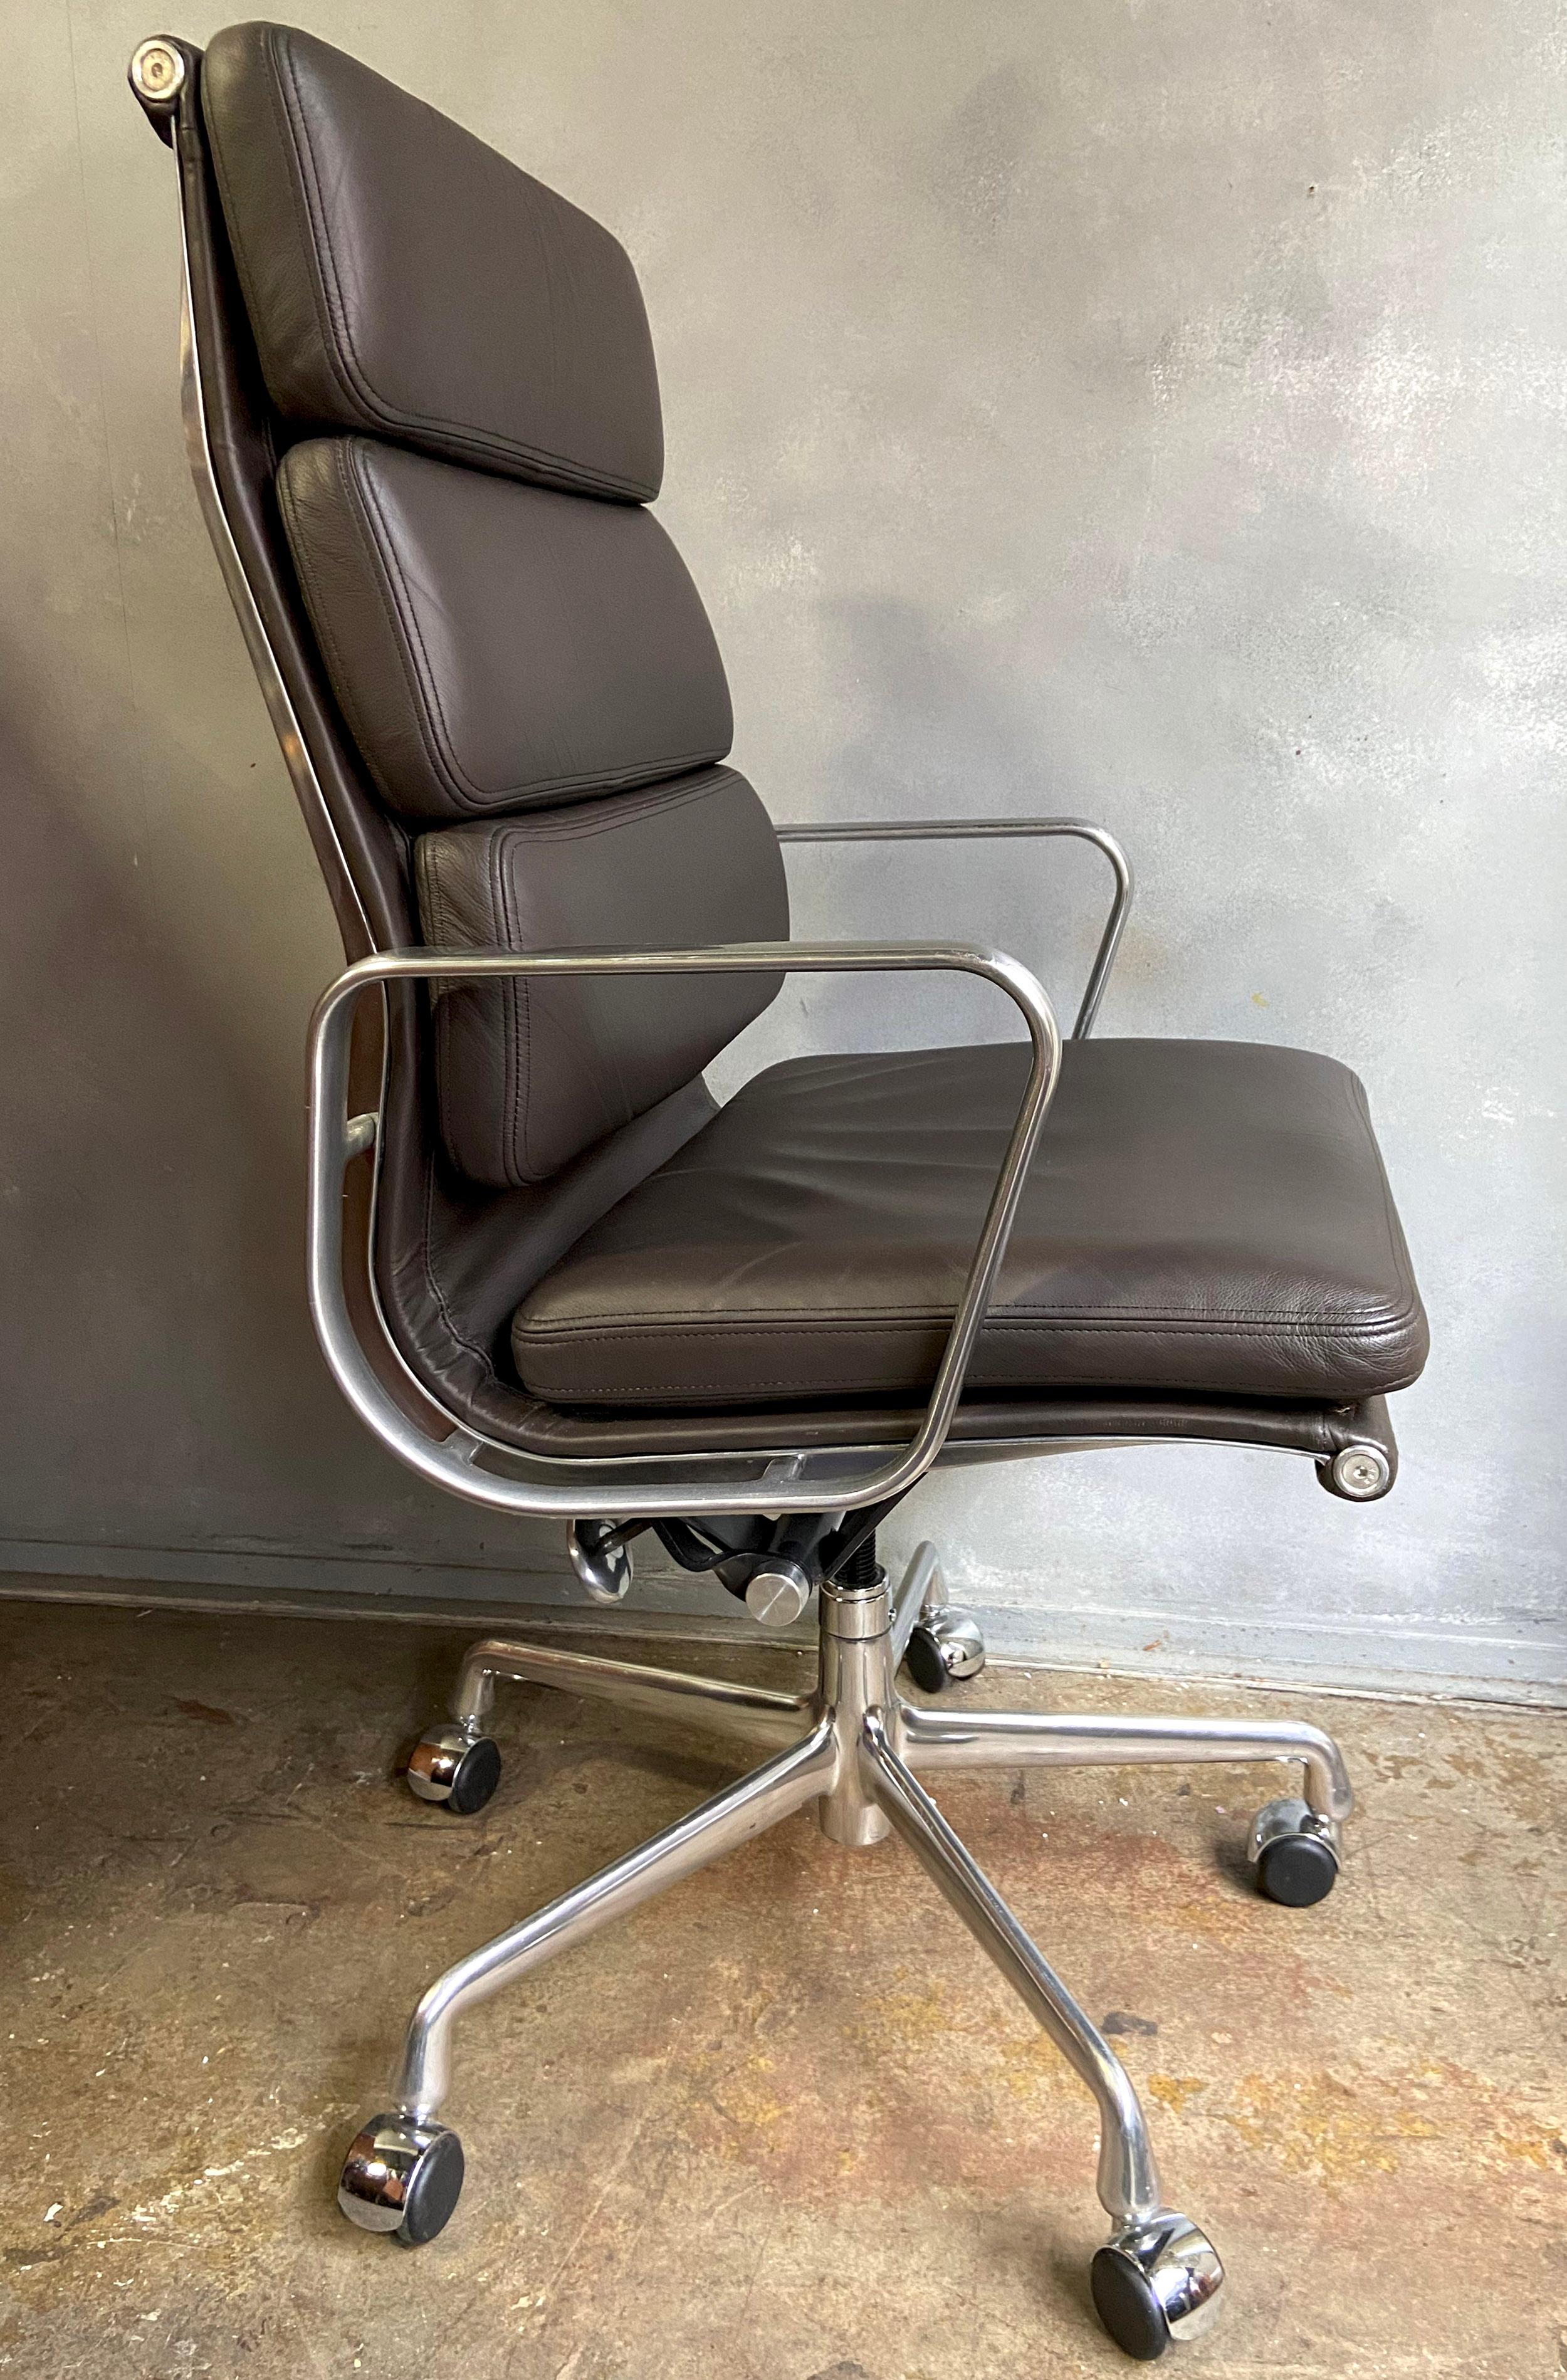 For your consideration is an Eames for Herman Miller vintage soft pad chair ( High Back) in a dark chocolate brown.

This authentic vintage example is an icon of Mid-Century Modern design. This chair is part of the Eames Aluminum group designed